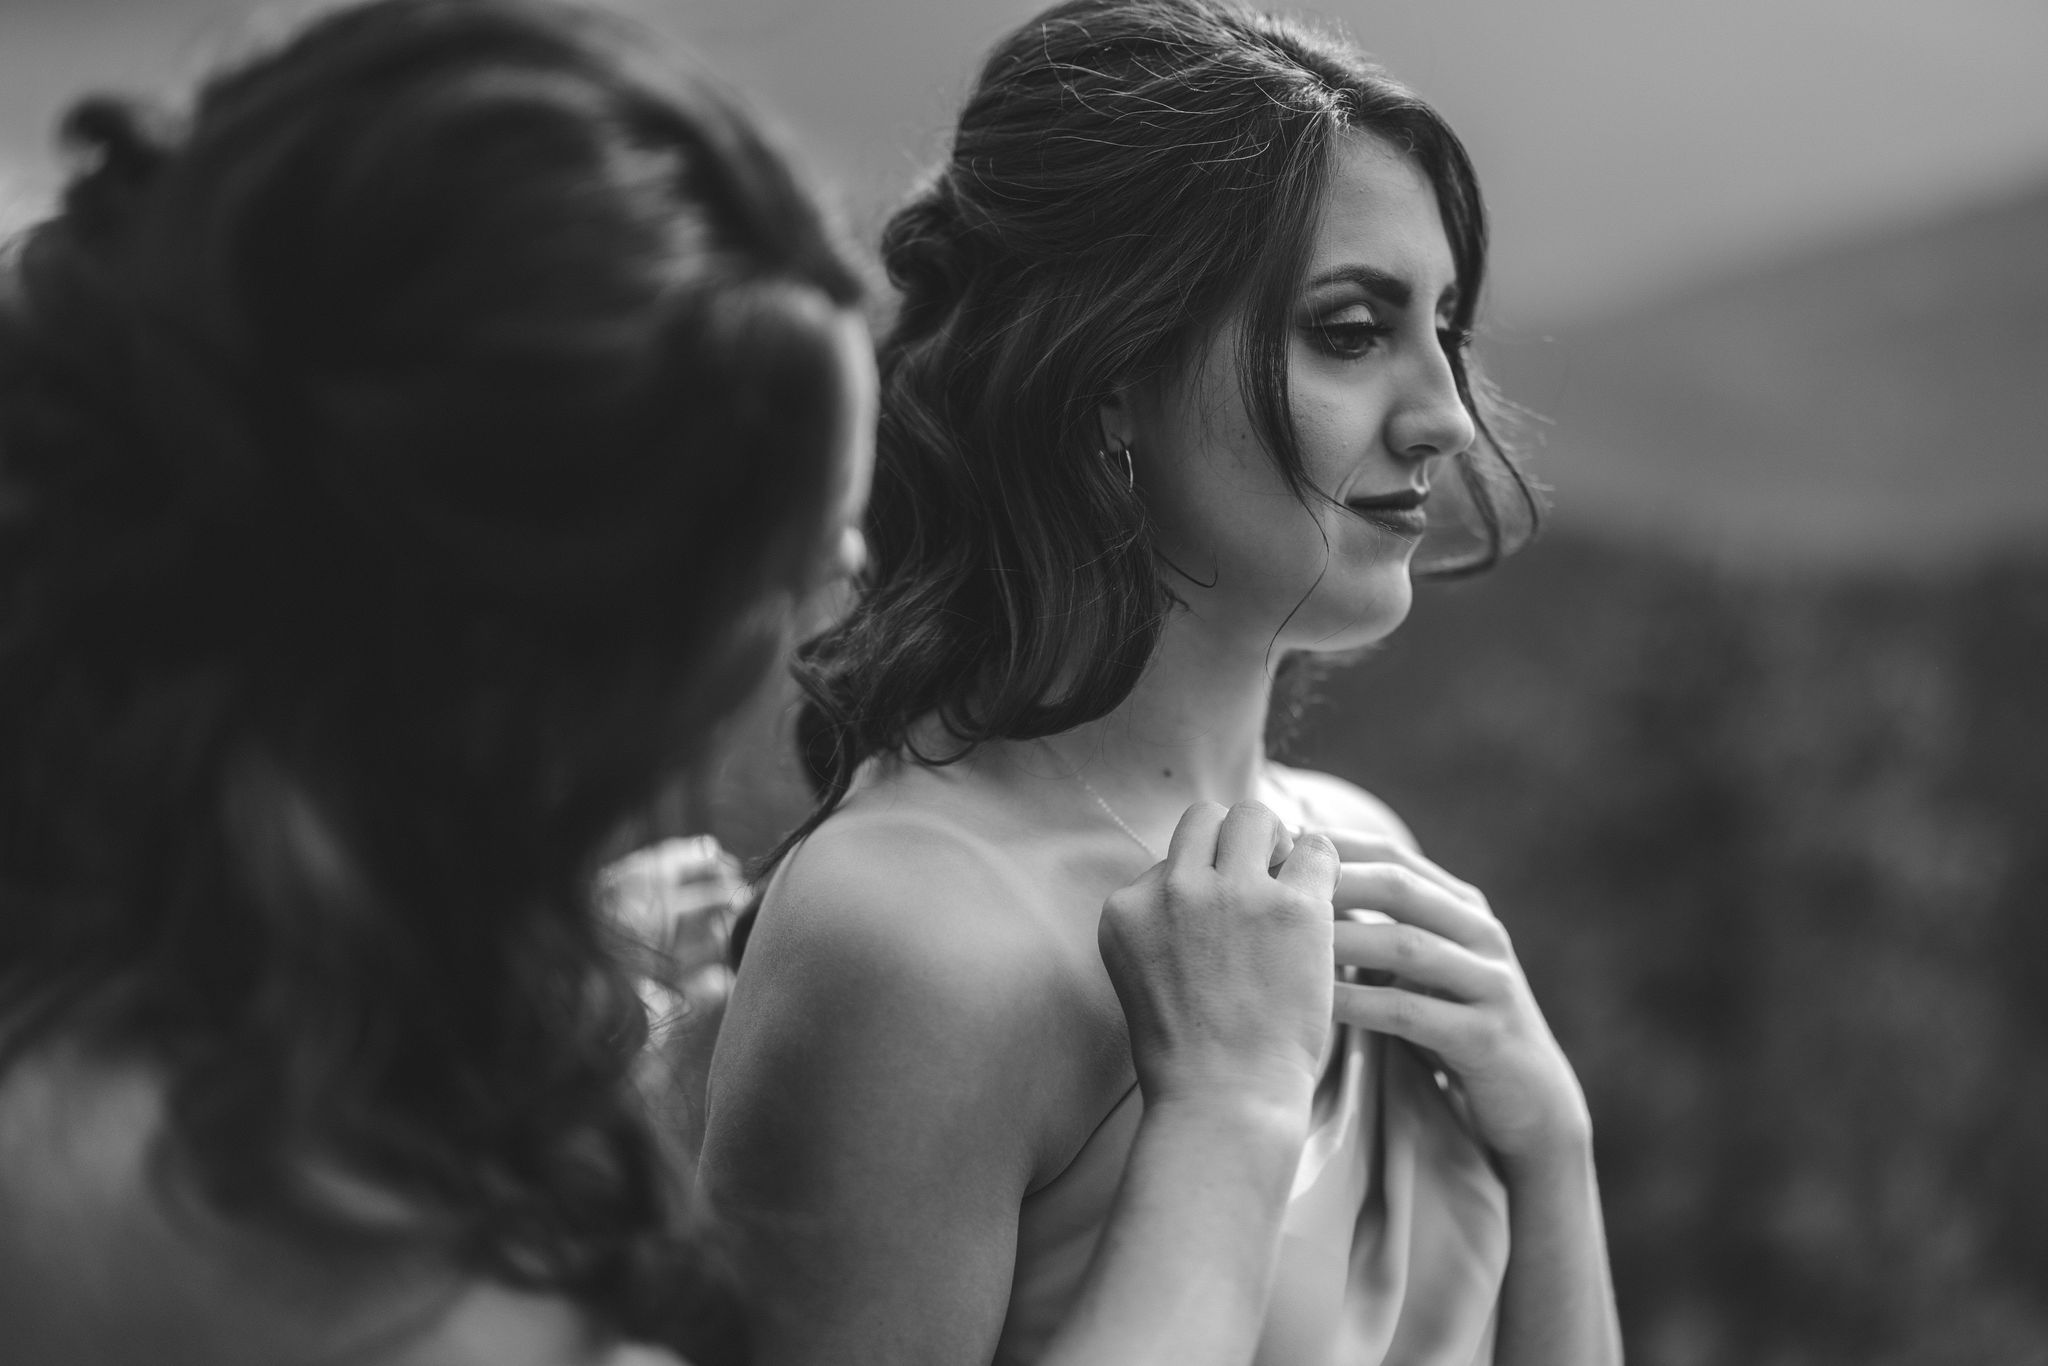 brides mother puts necklace on her during her dry wedding in colorado.